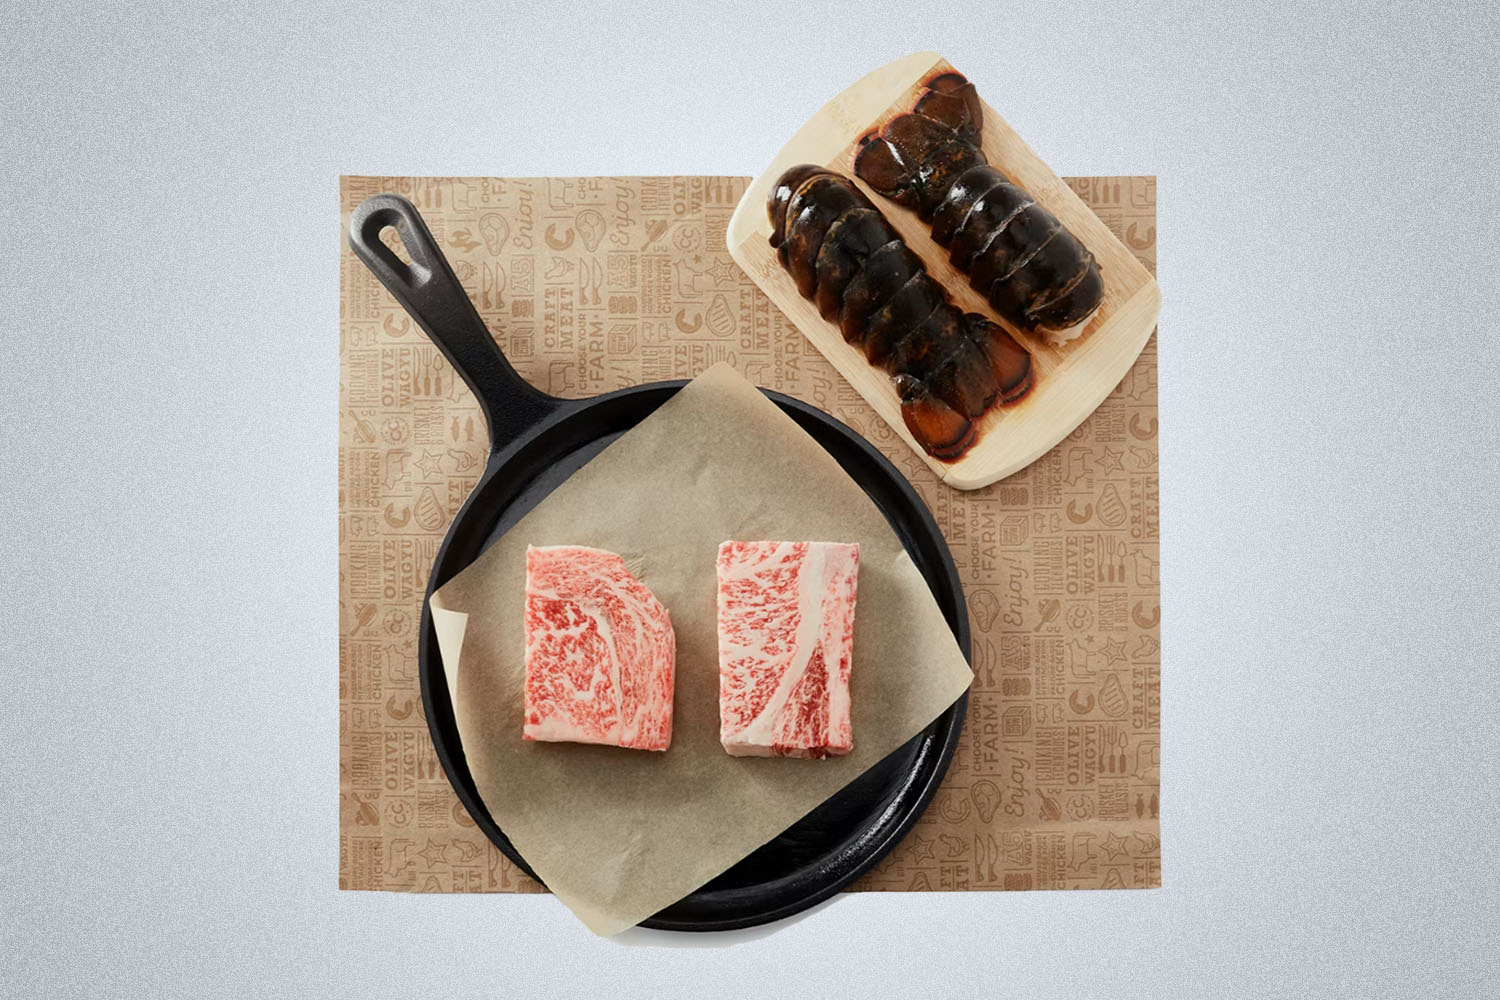 a plate of surf and turf items on a wooden block on a grey background